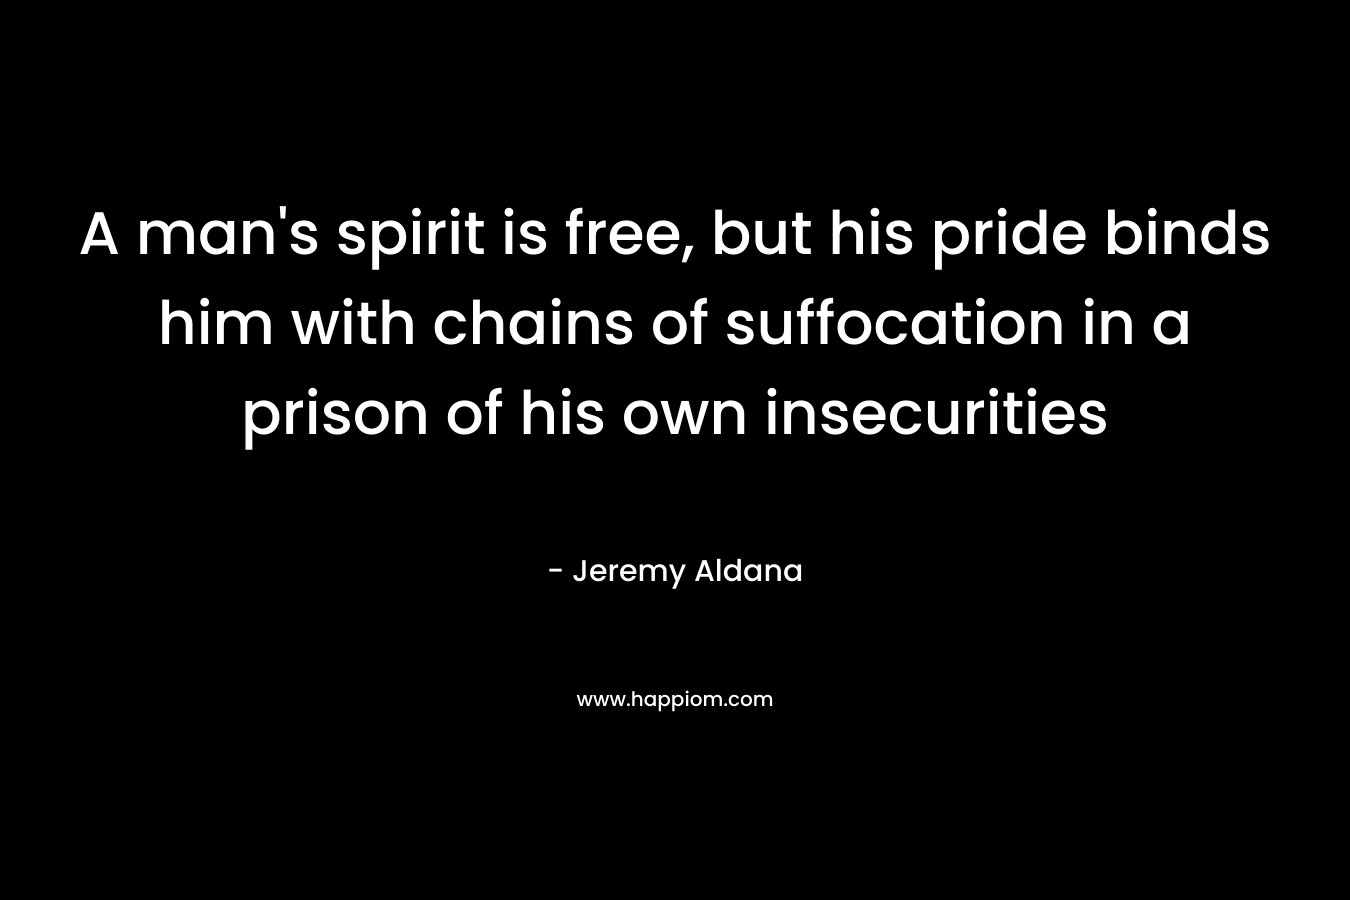 A man's spirit is free, but his pride binds him with chains of suffocation in a prison of his own insecurities